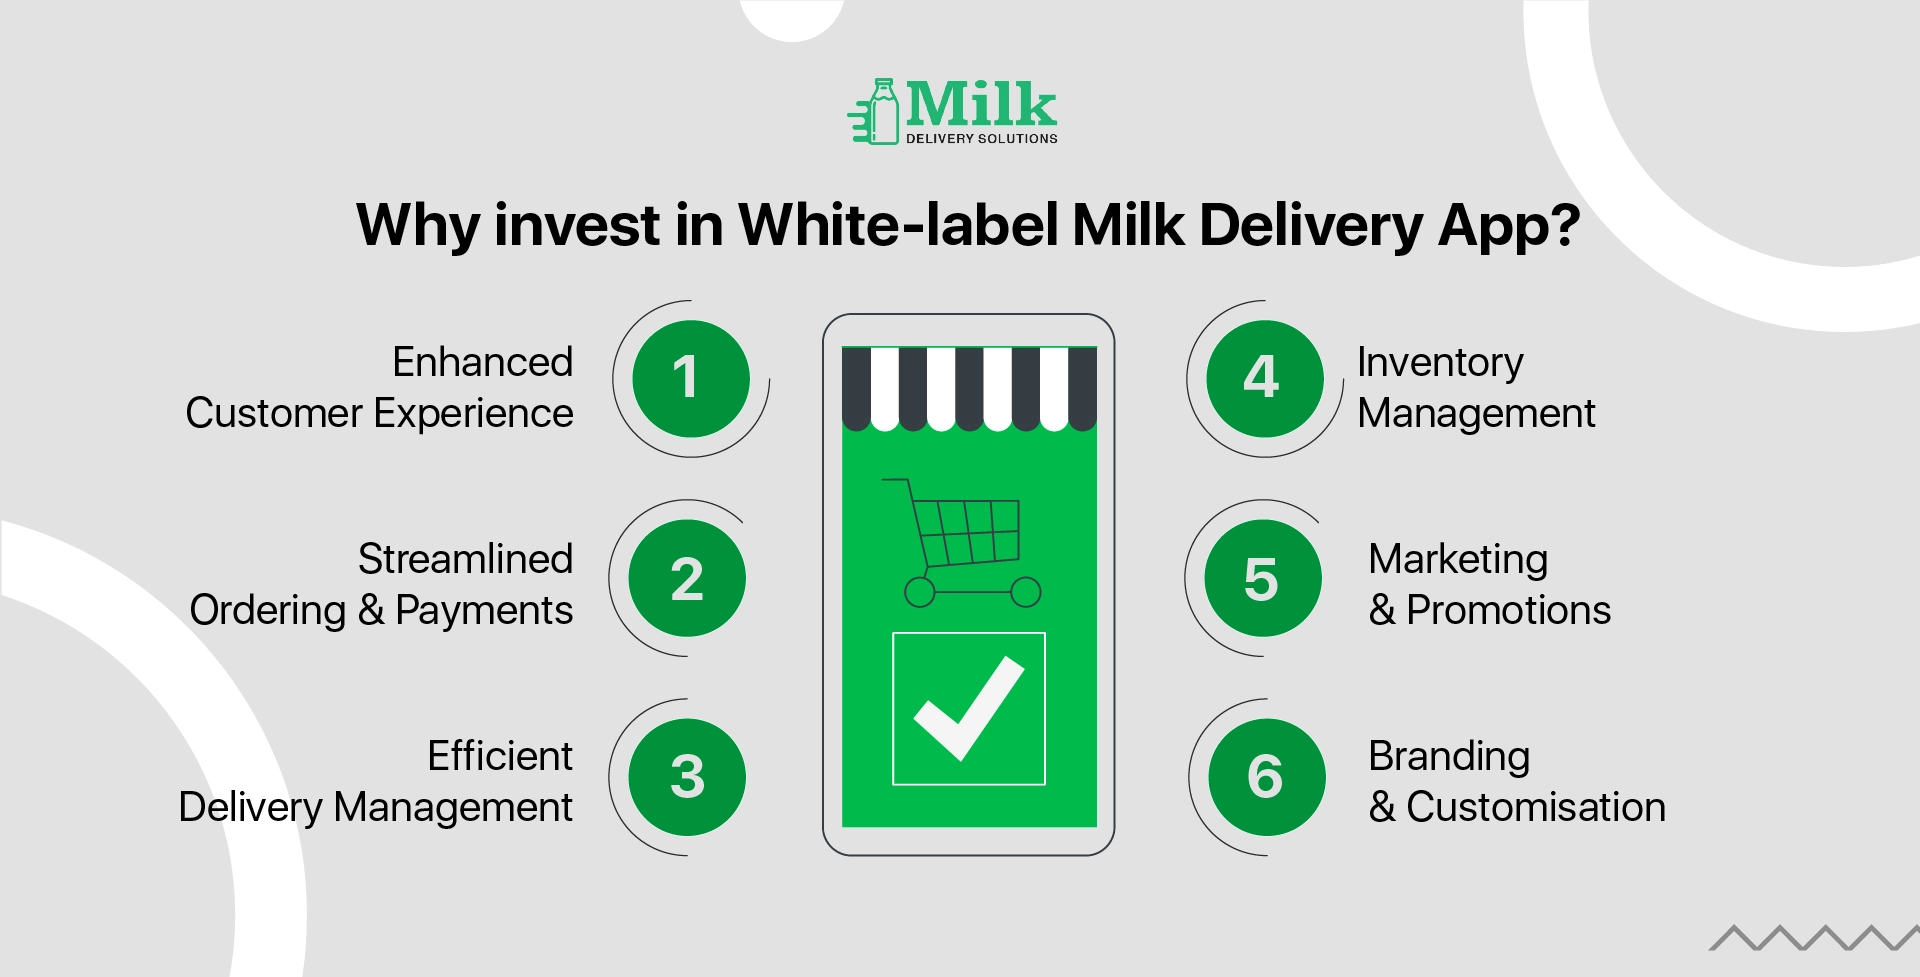 ravi garg, mds, invest, milk delivery app, customer experience, ordering, payments, delivery management, inventory management, marketing, promotions, branding, customisation